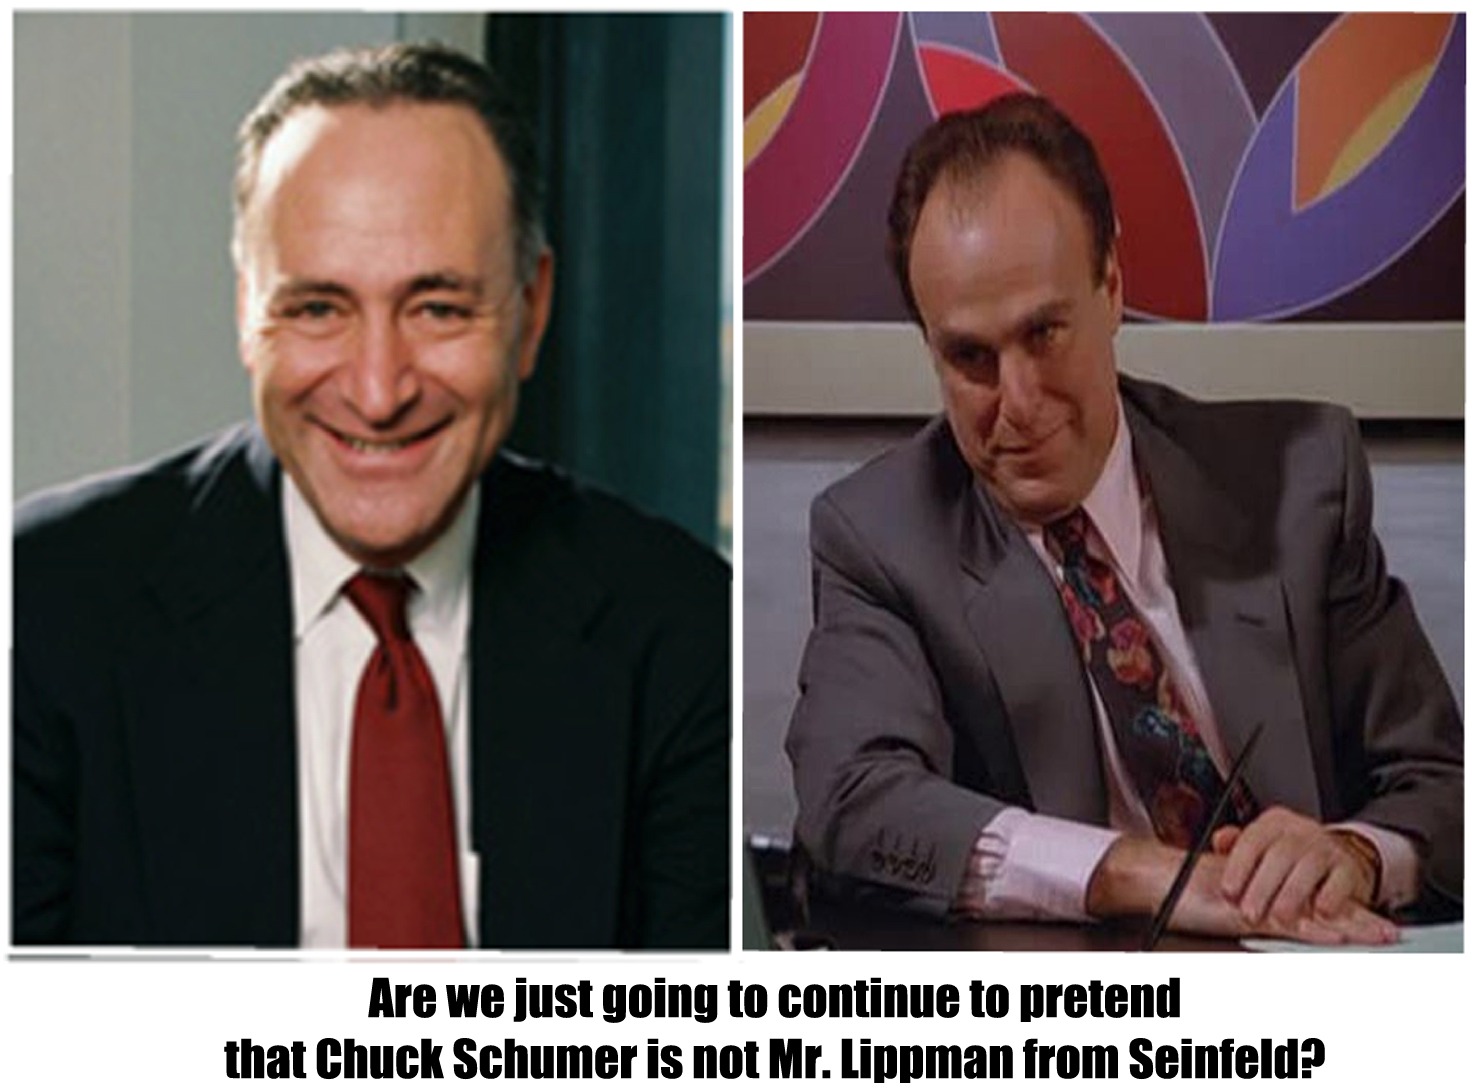 memes - entrepreneur - Are we just going to continue to pretend that Chuck Schumer is not Mr. Lippman from Seinfeld?